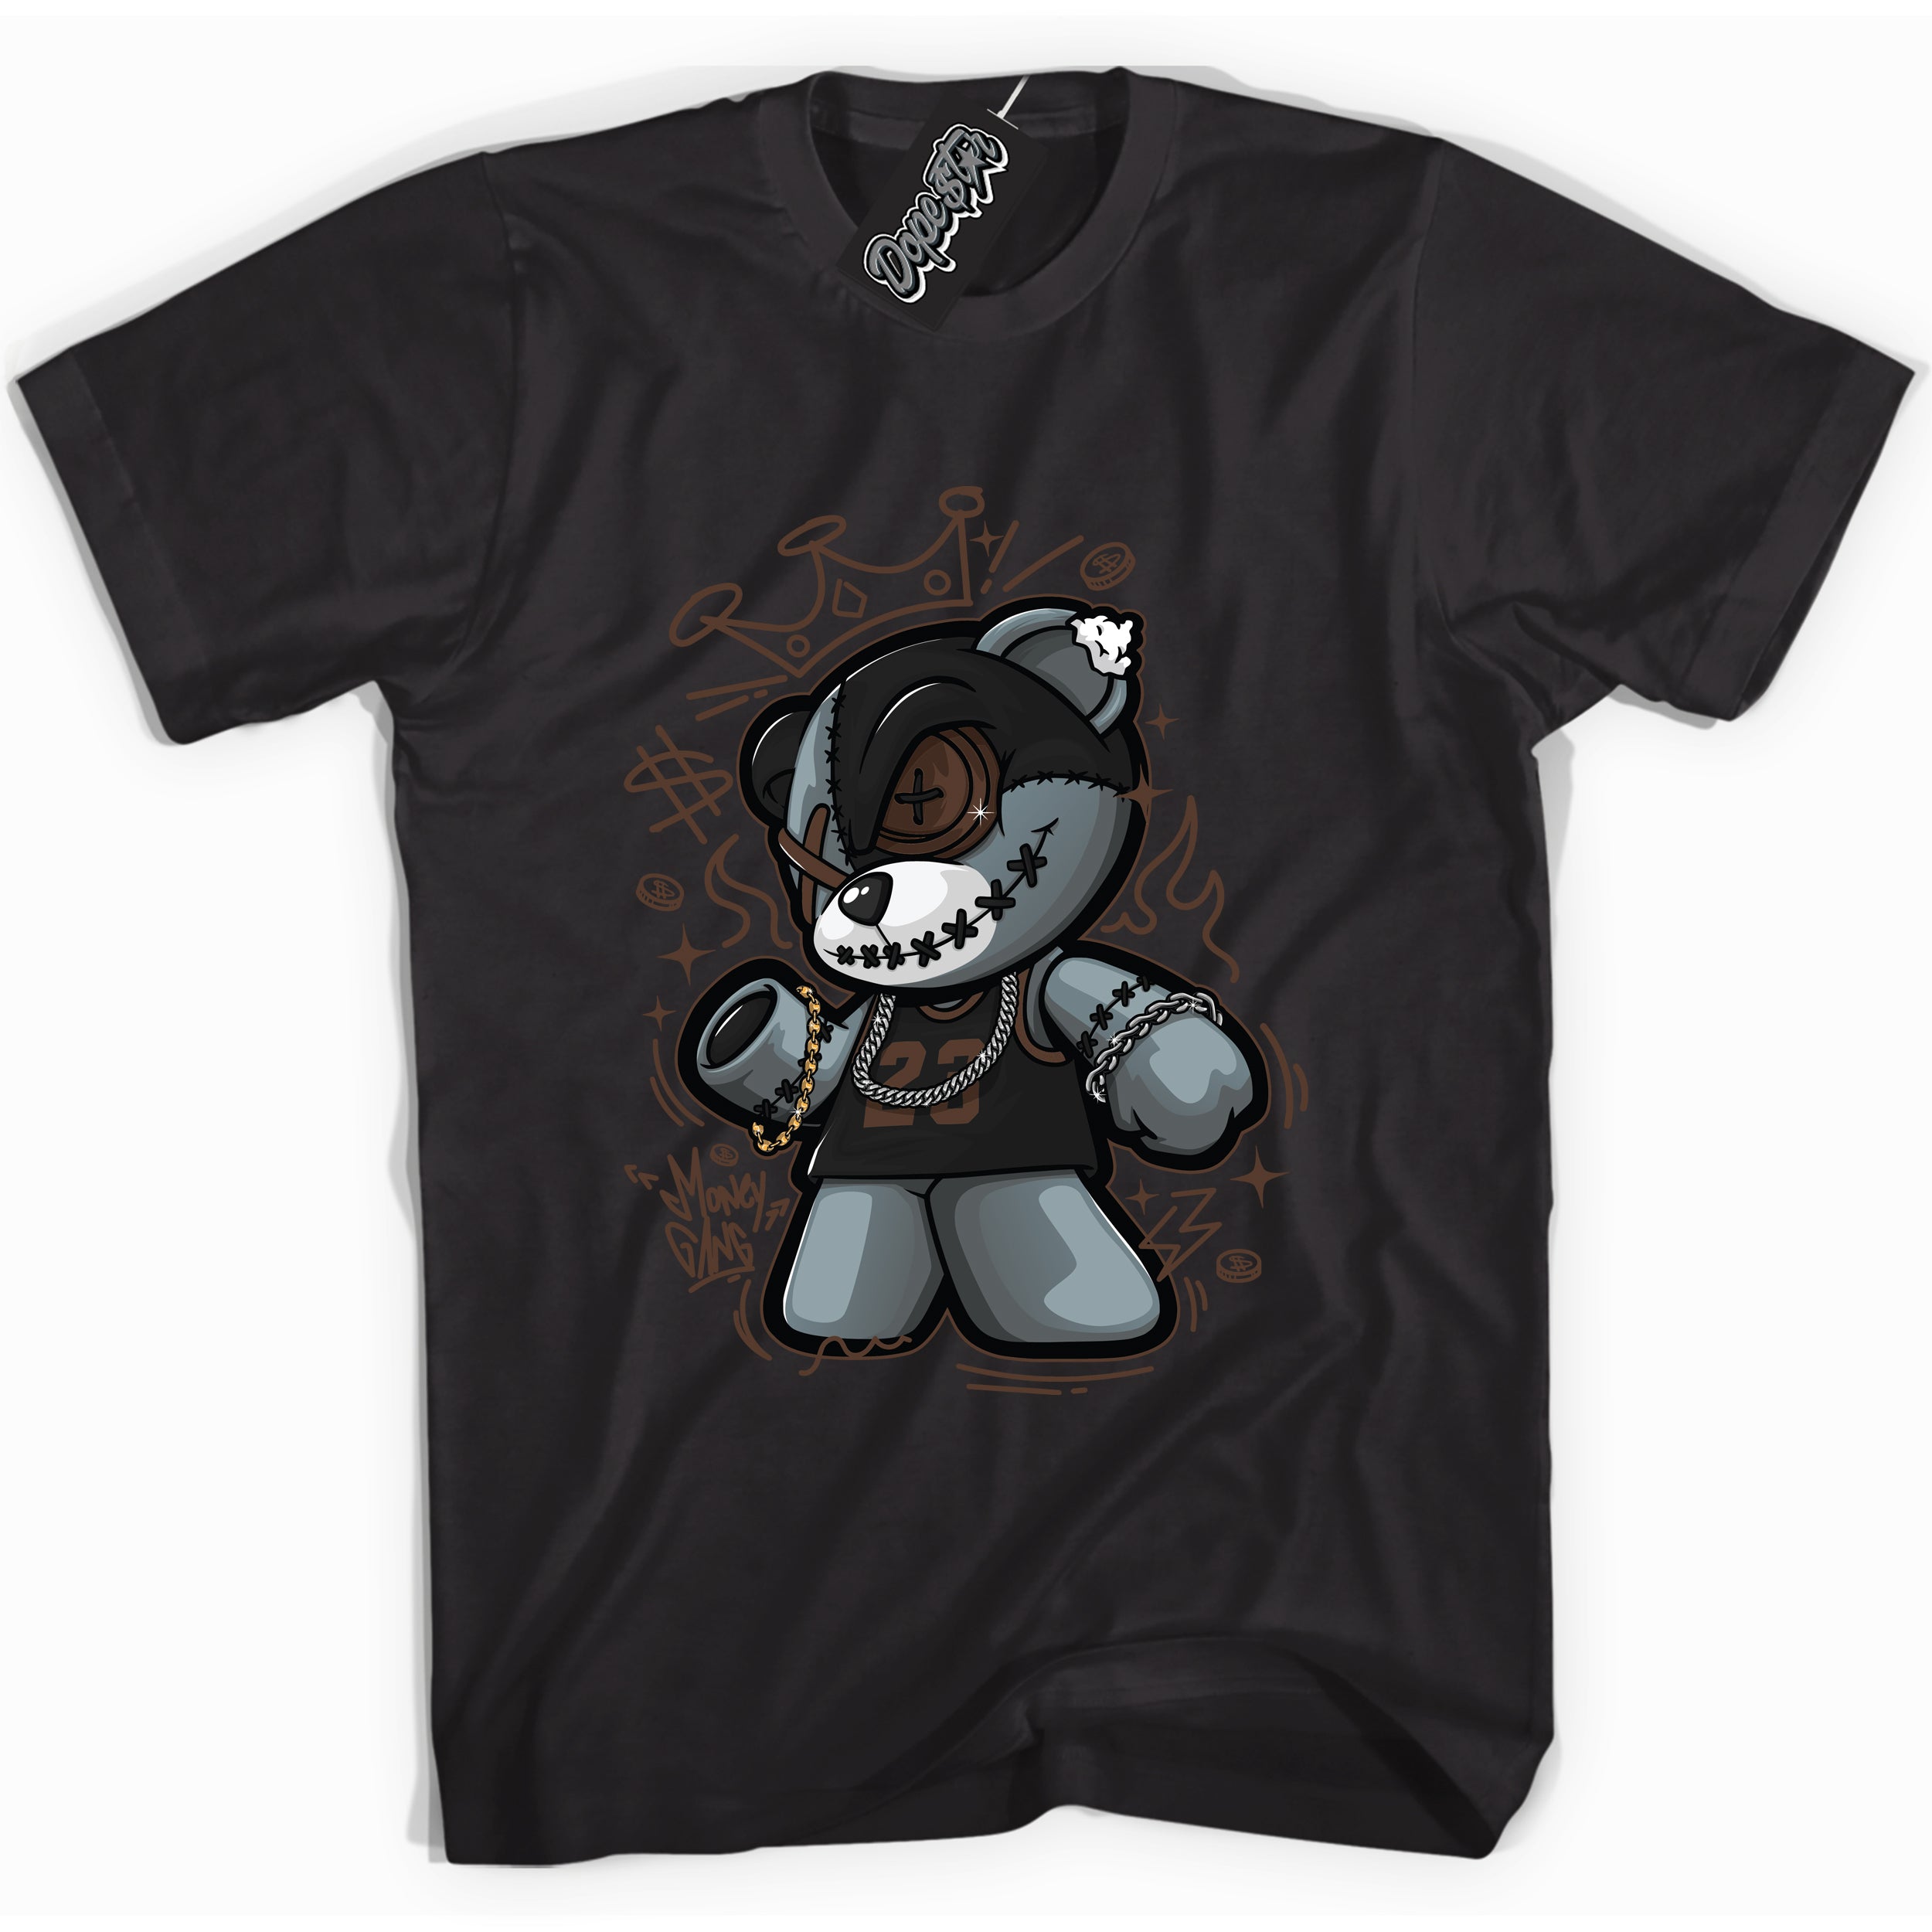 Cool Black graphic tee with “ Money Gang Bear ” design, that perfectly matches Palomino 1s sneakers 